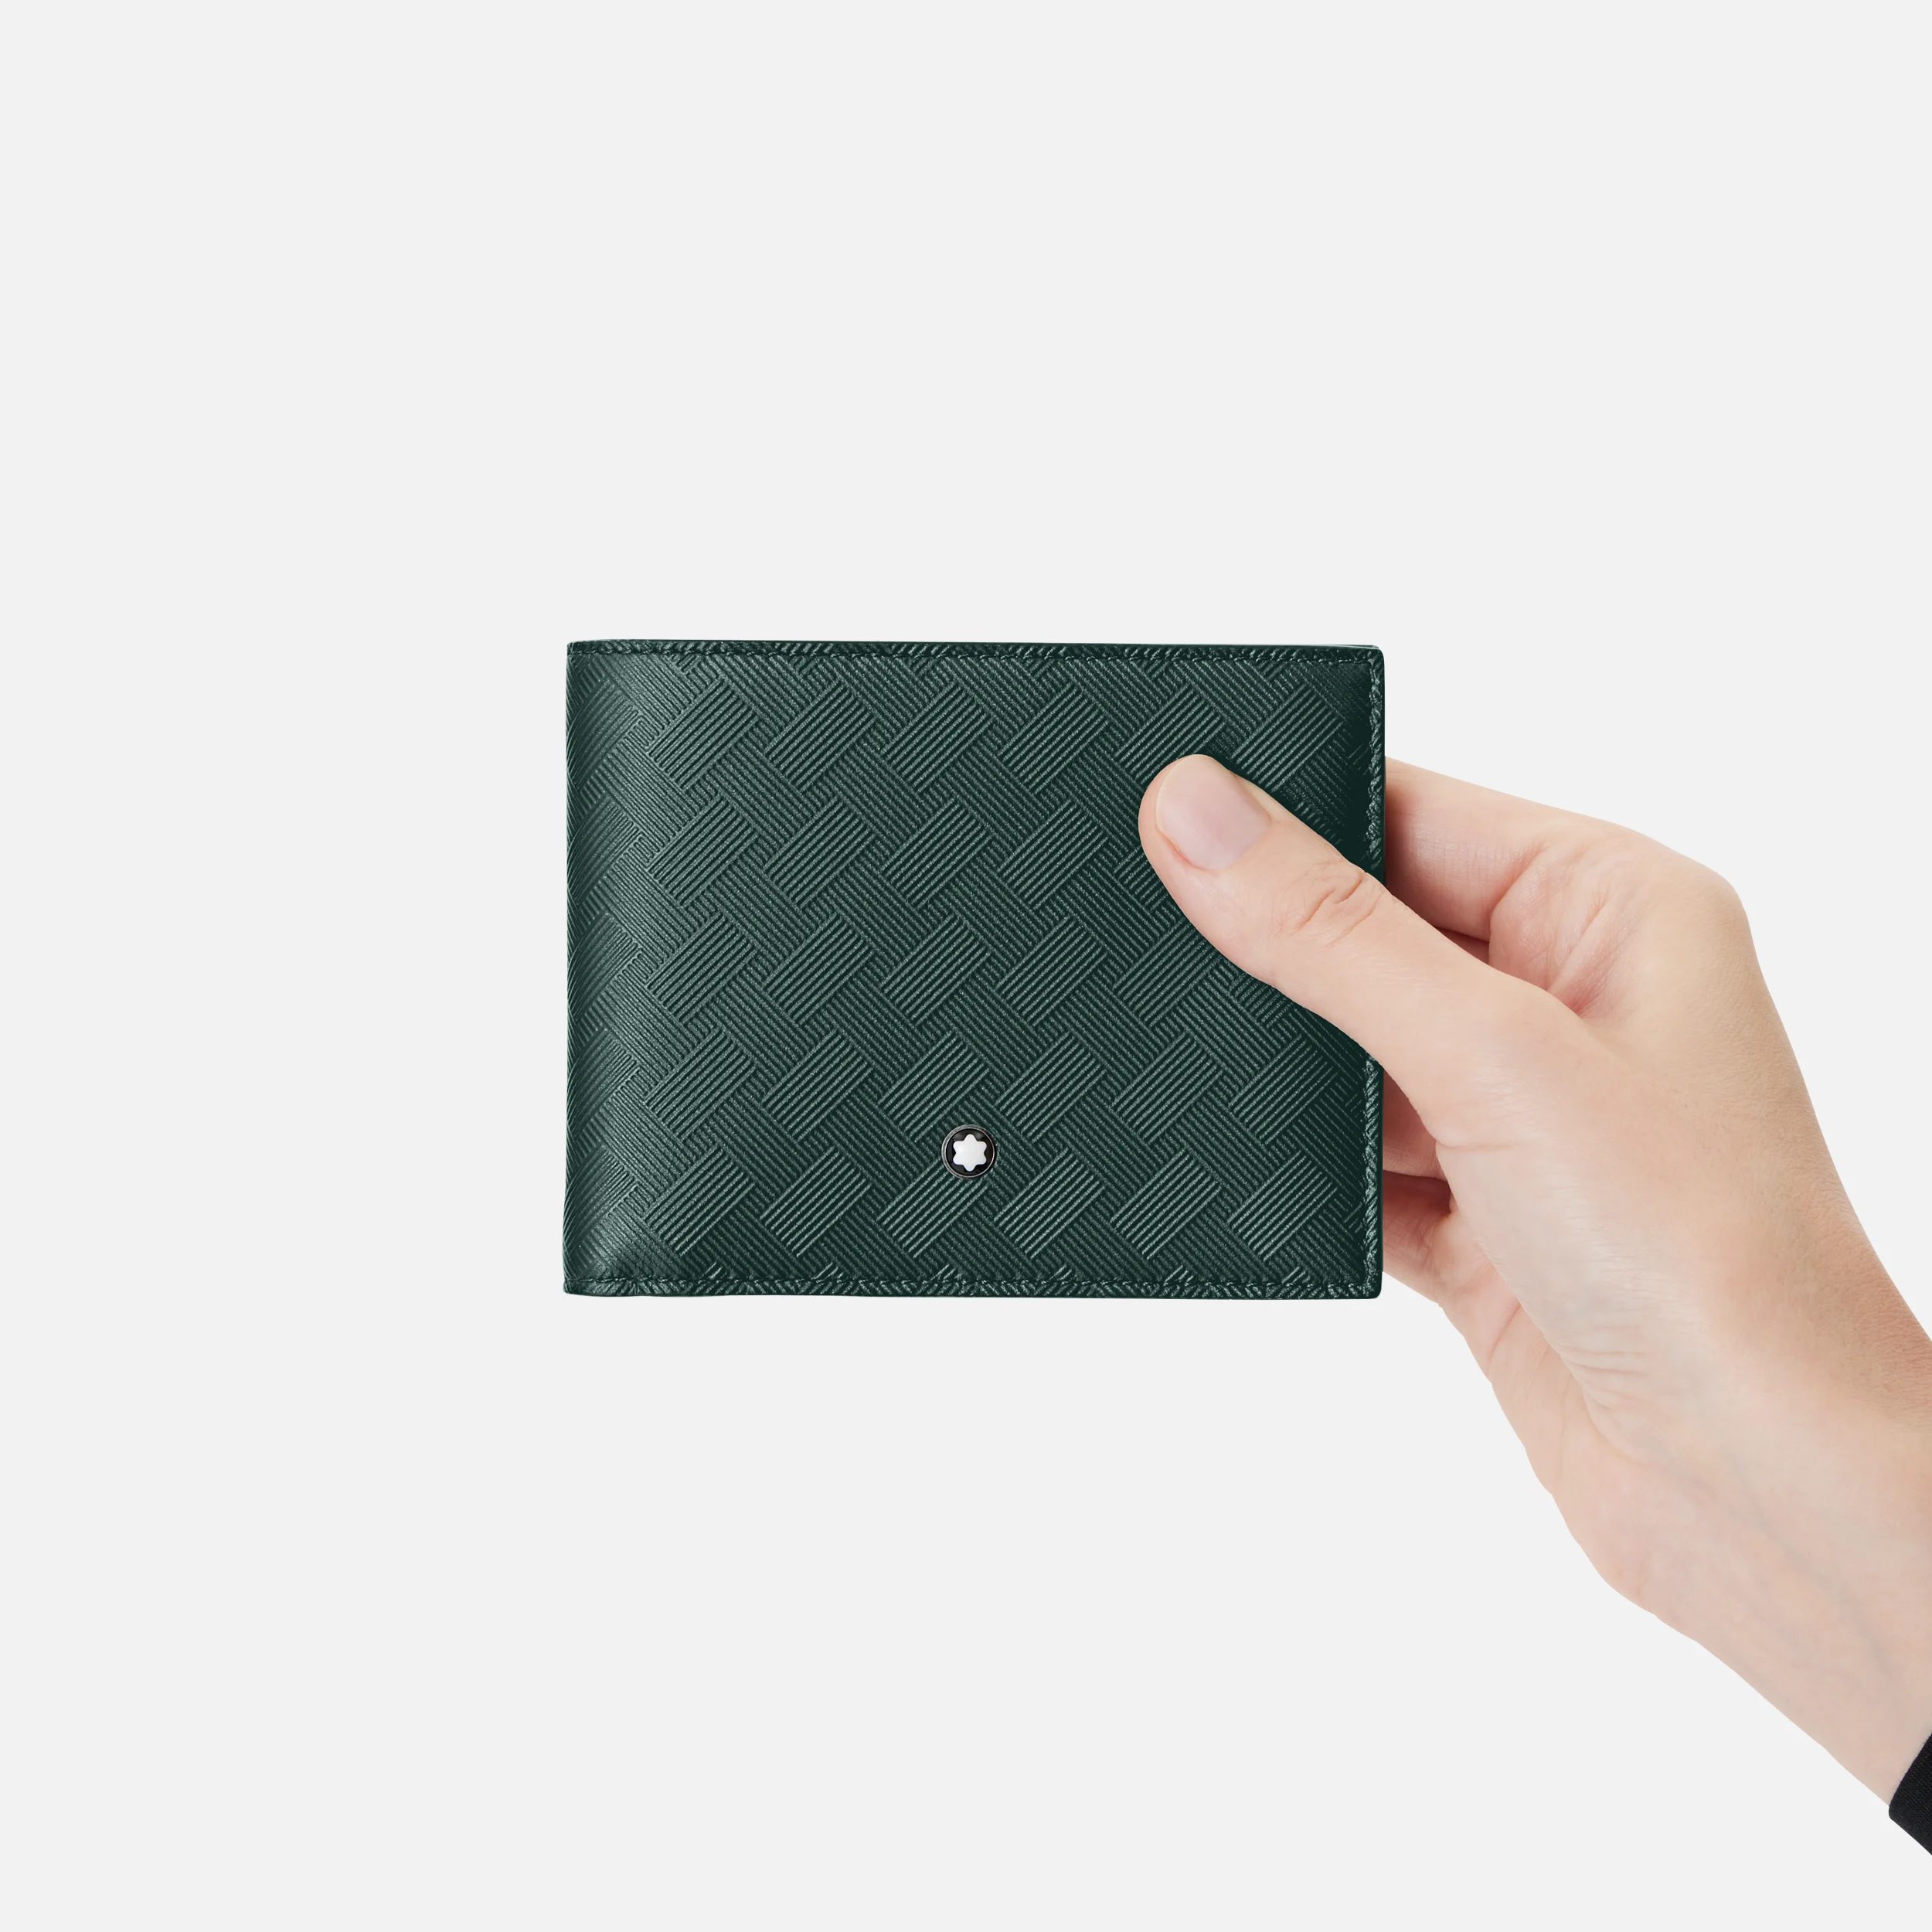 Montblanc Extreme 3.0 Wallet 6CC British Green - Pencraft the boutique